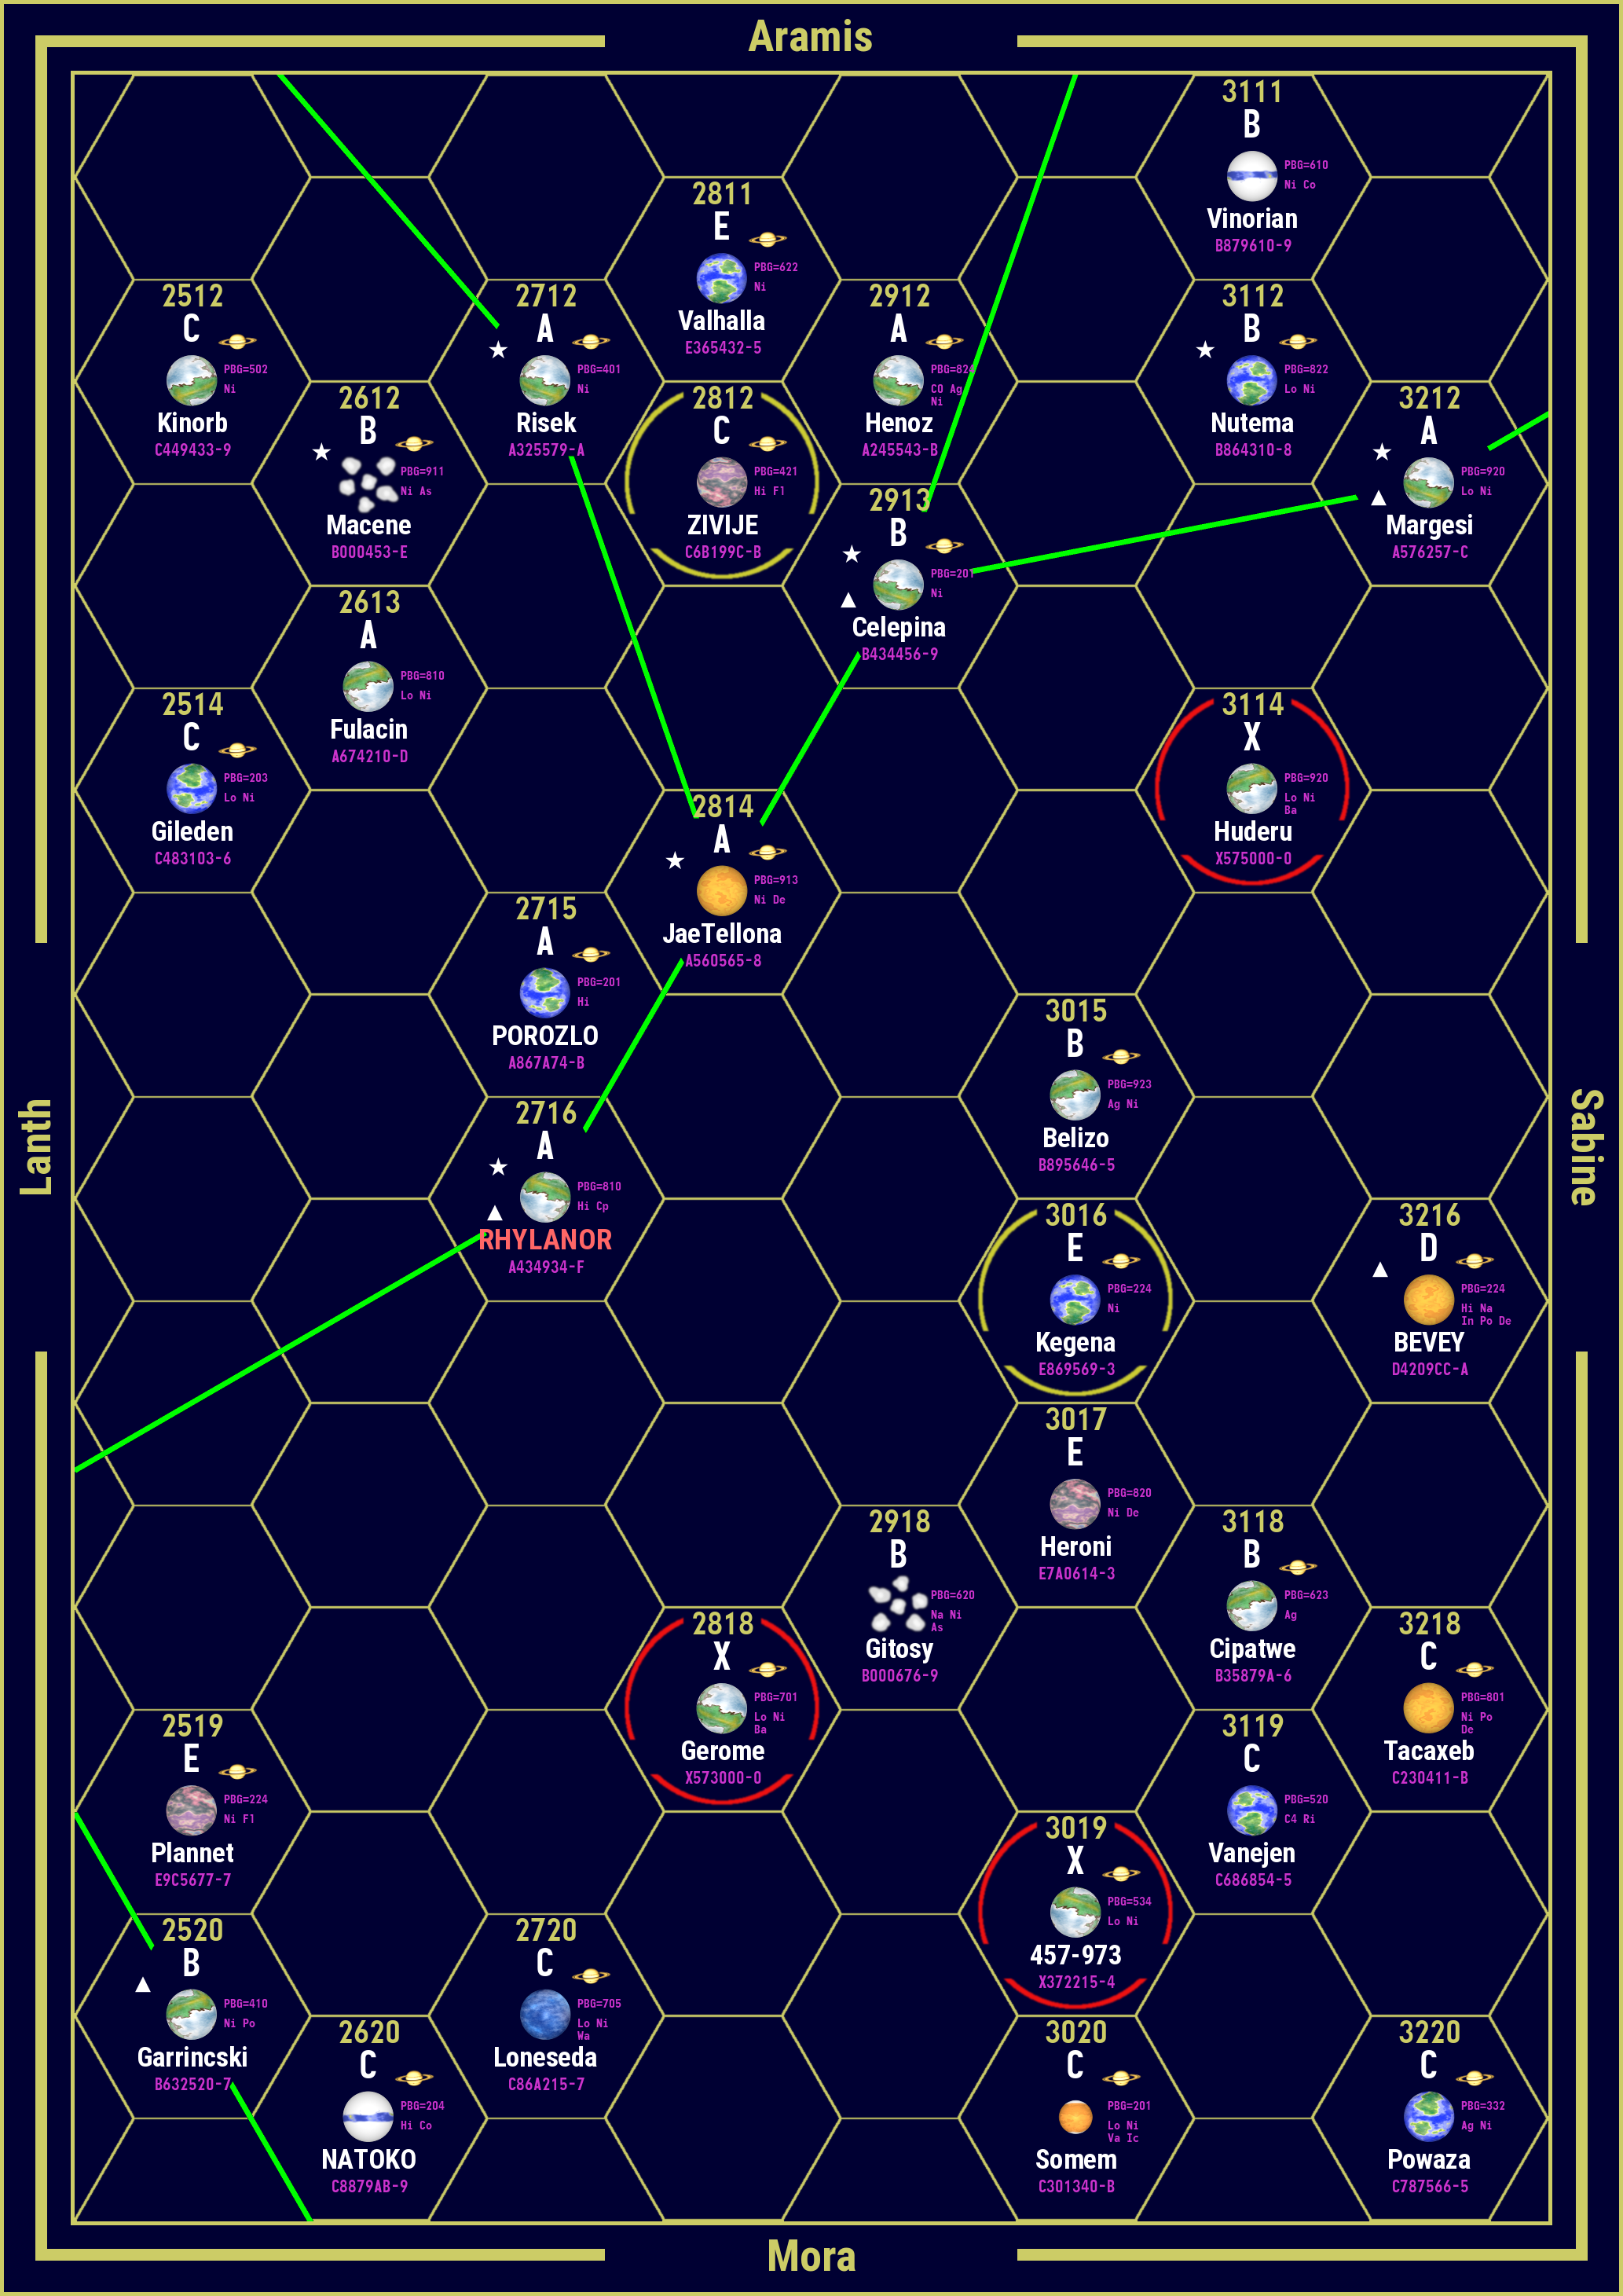 Generating Subsector Map...